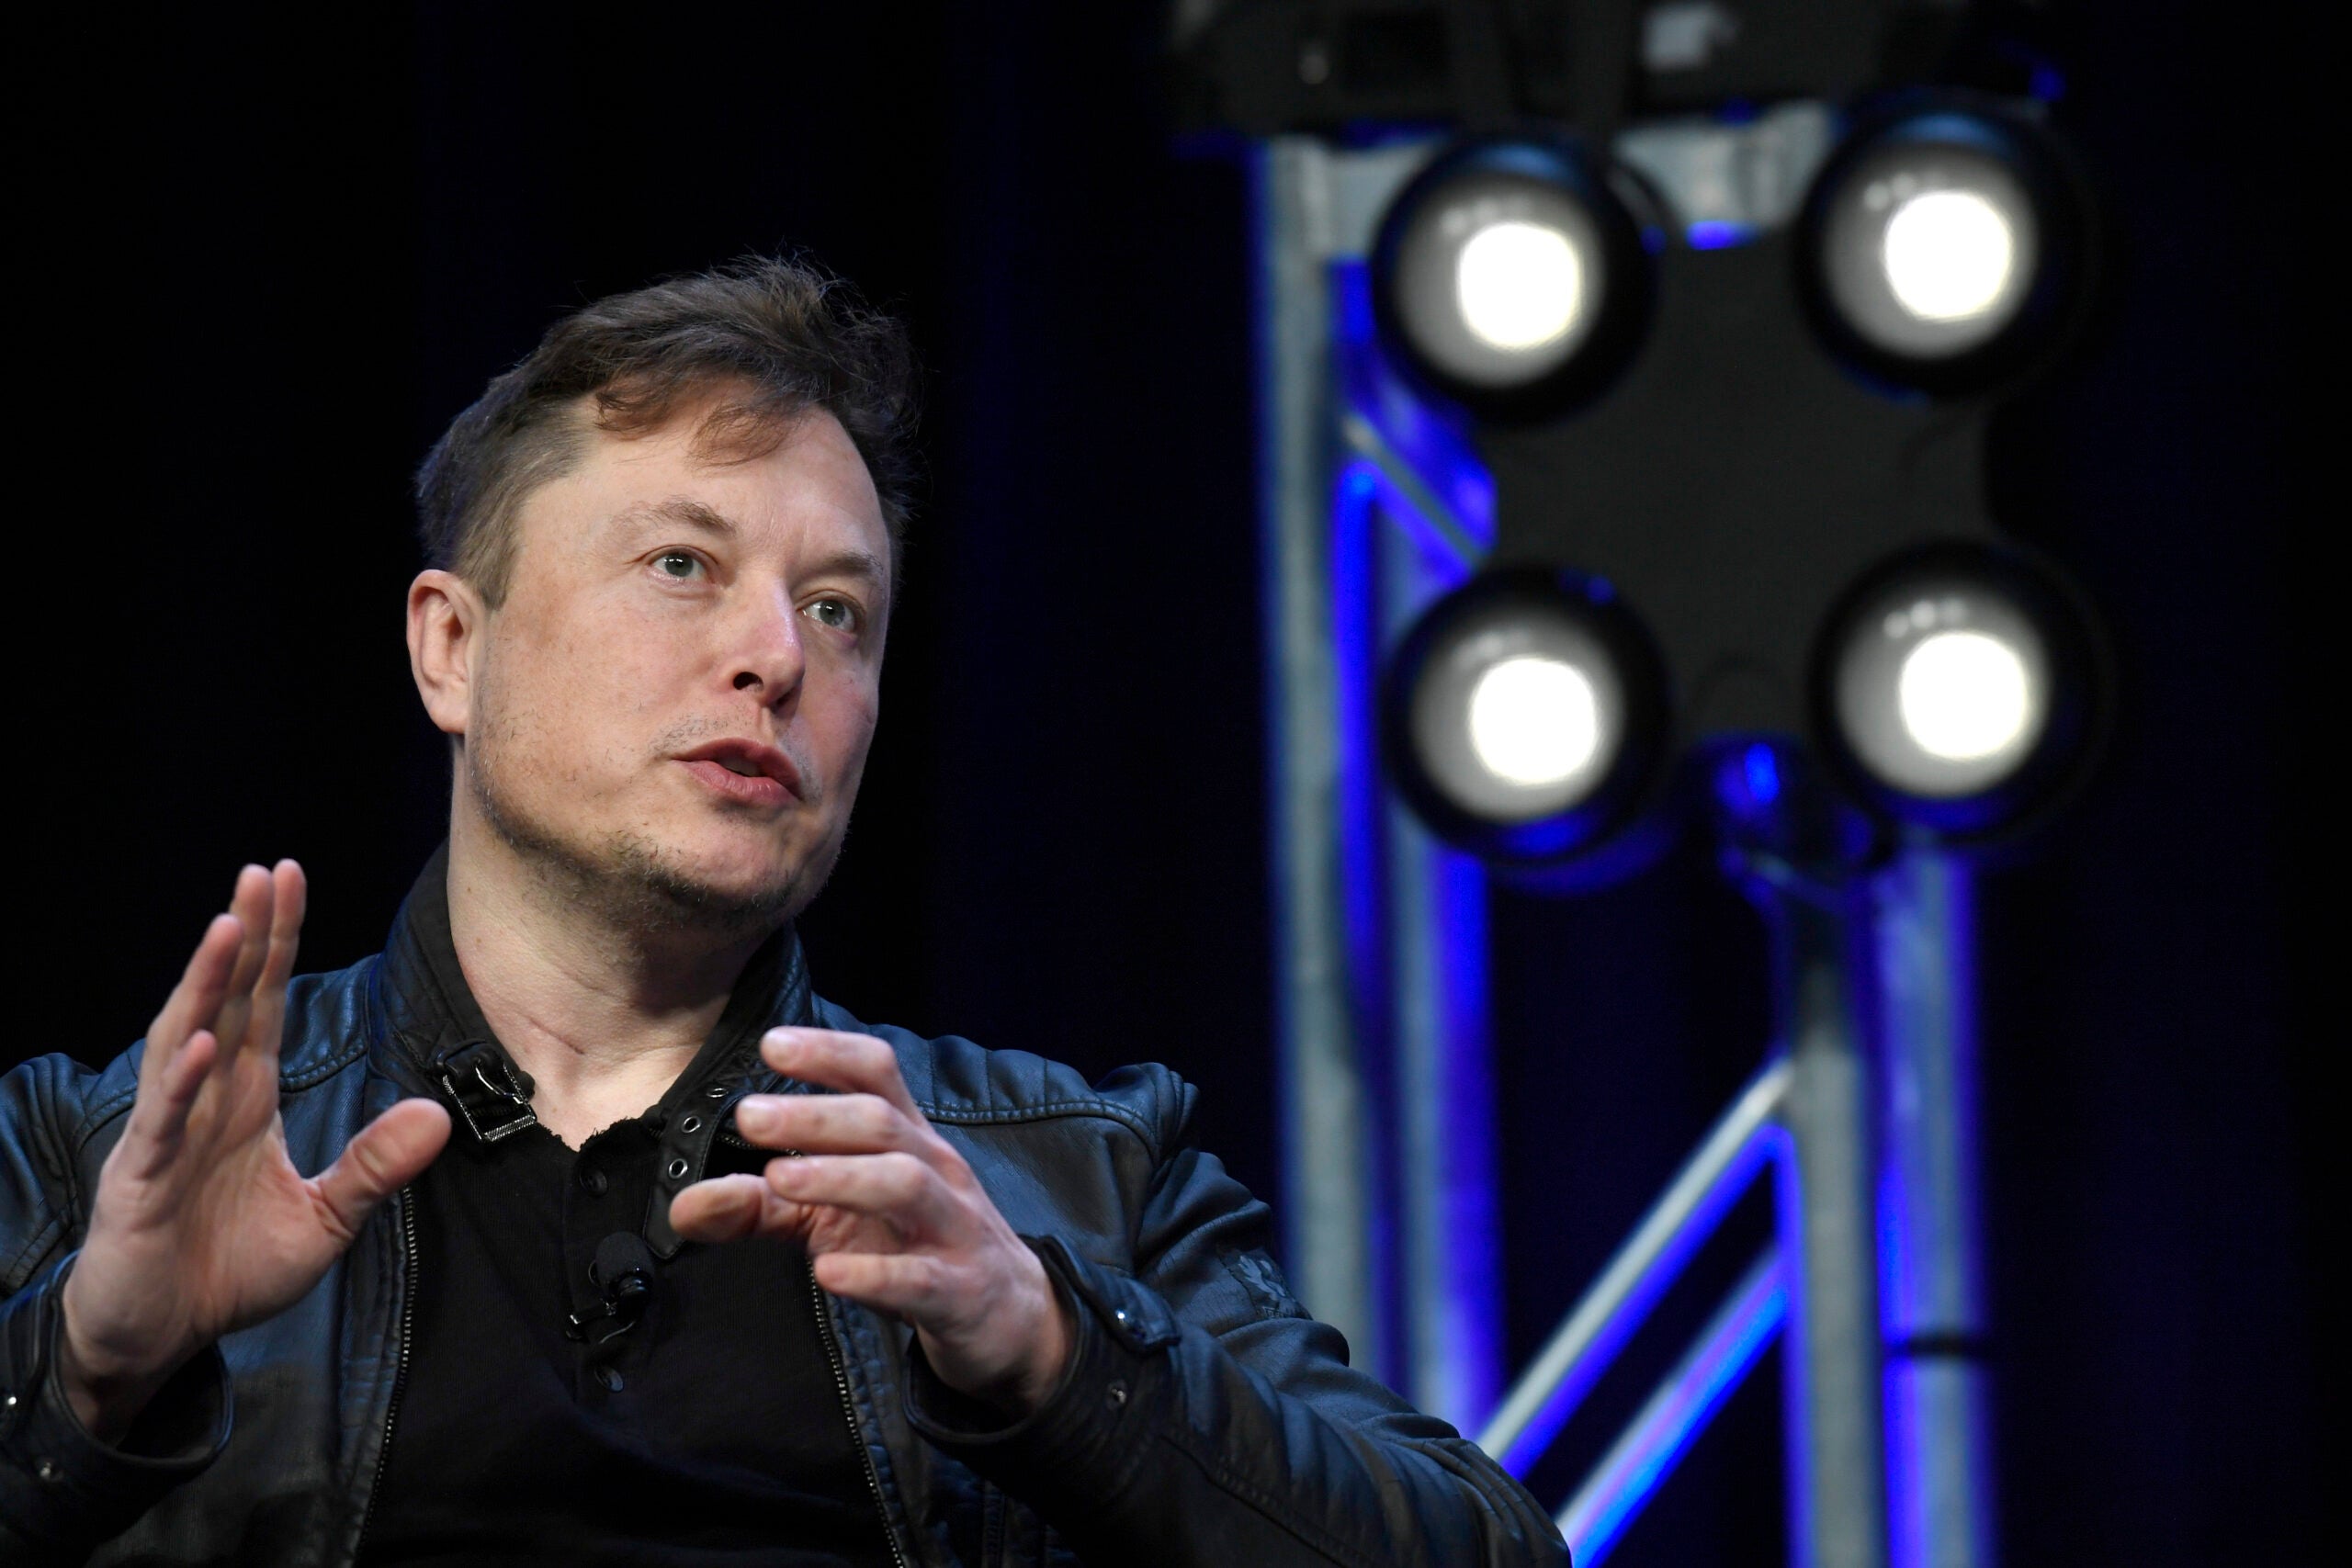 alt = Tesla and SpaceX Chief Executive Officer Elon Musk speaks at the SATELLITE Conference and Exhibition in Washington